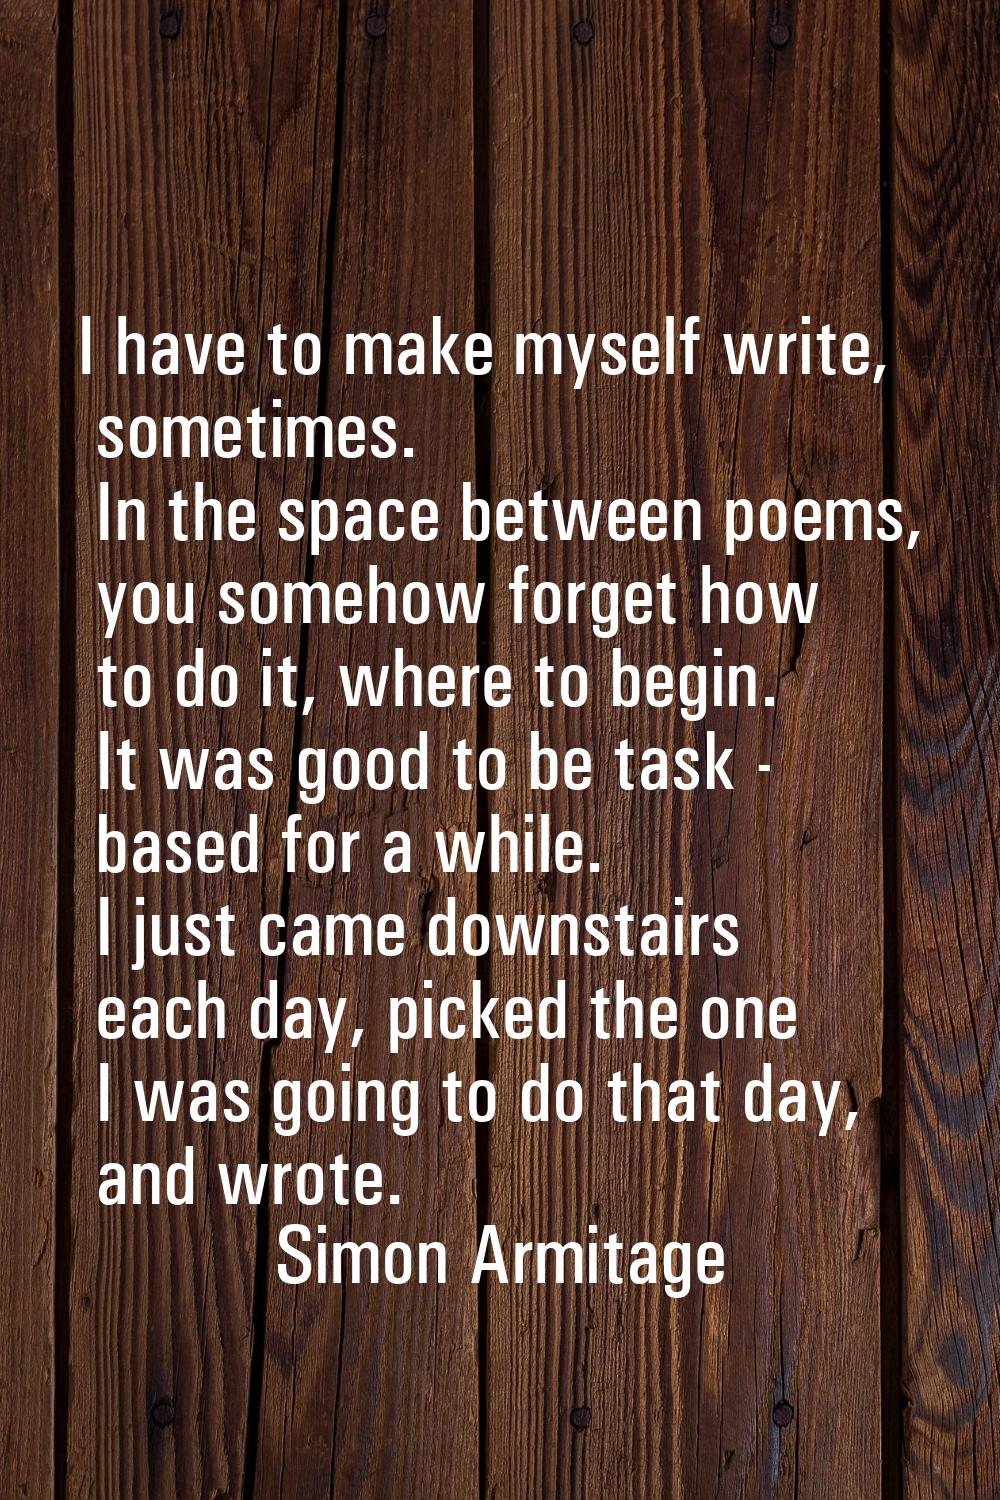 I have to make myself write, sometimes. In the space between poems, you somehow forget how to do it